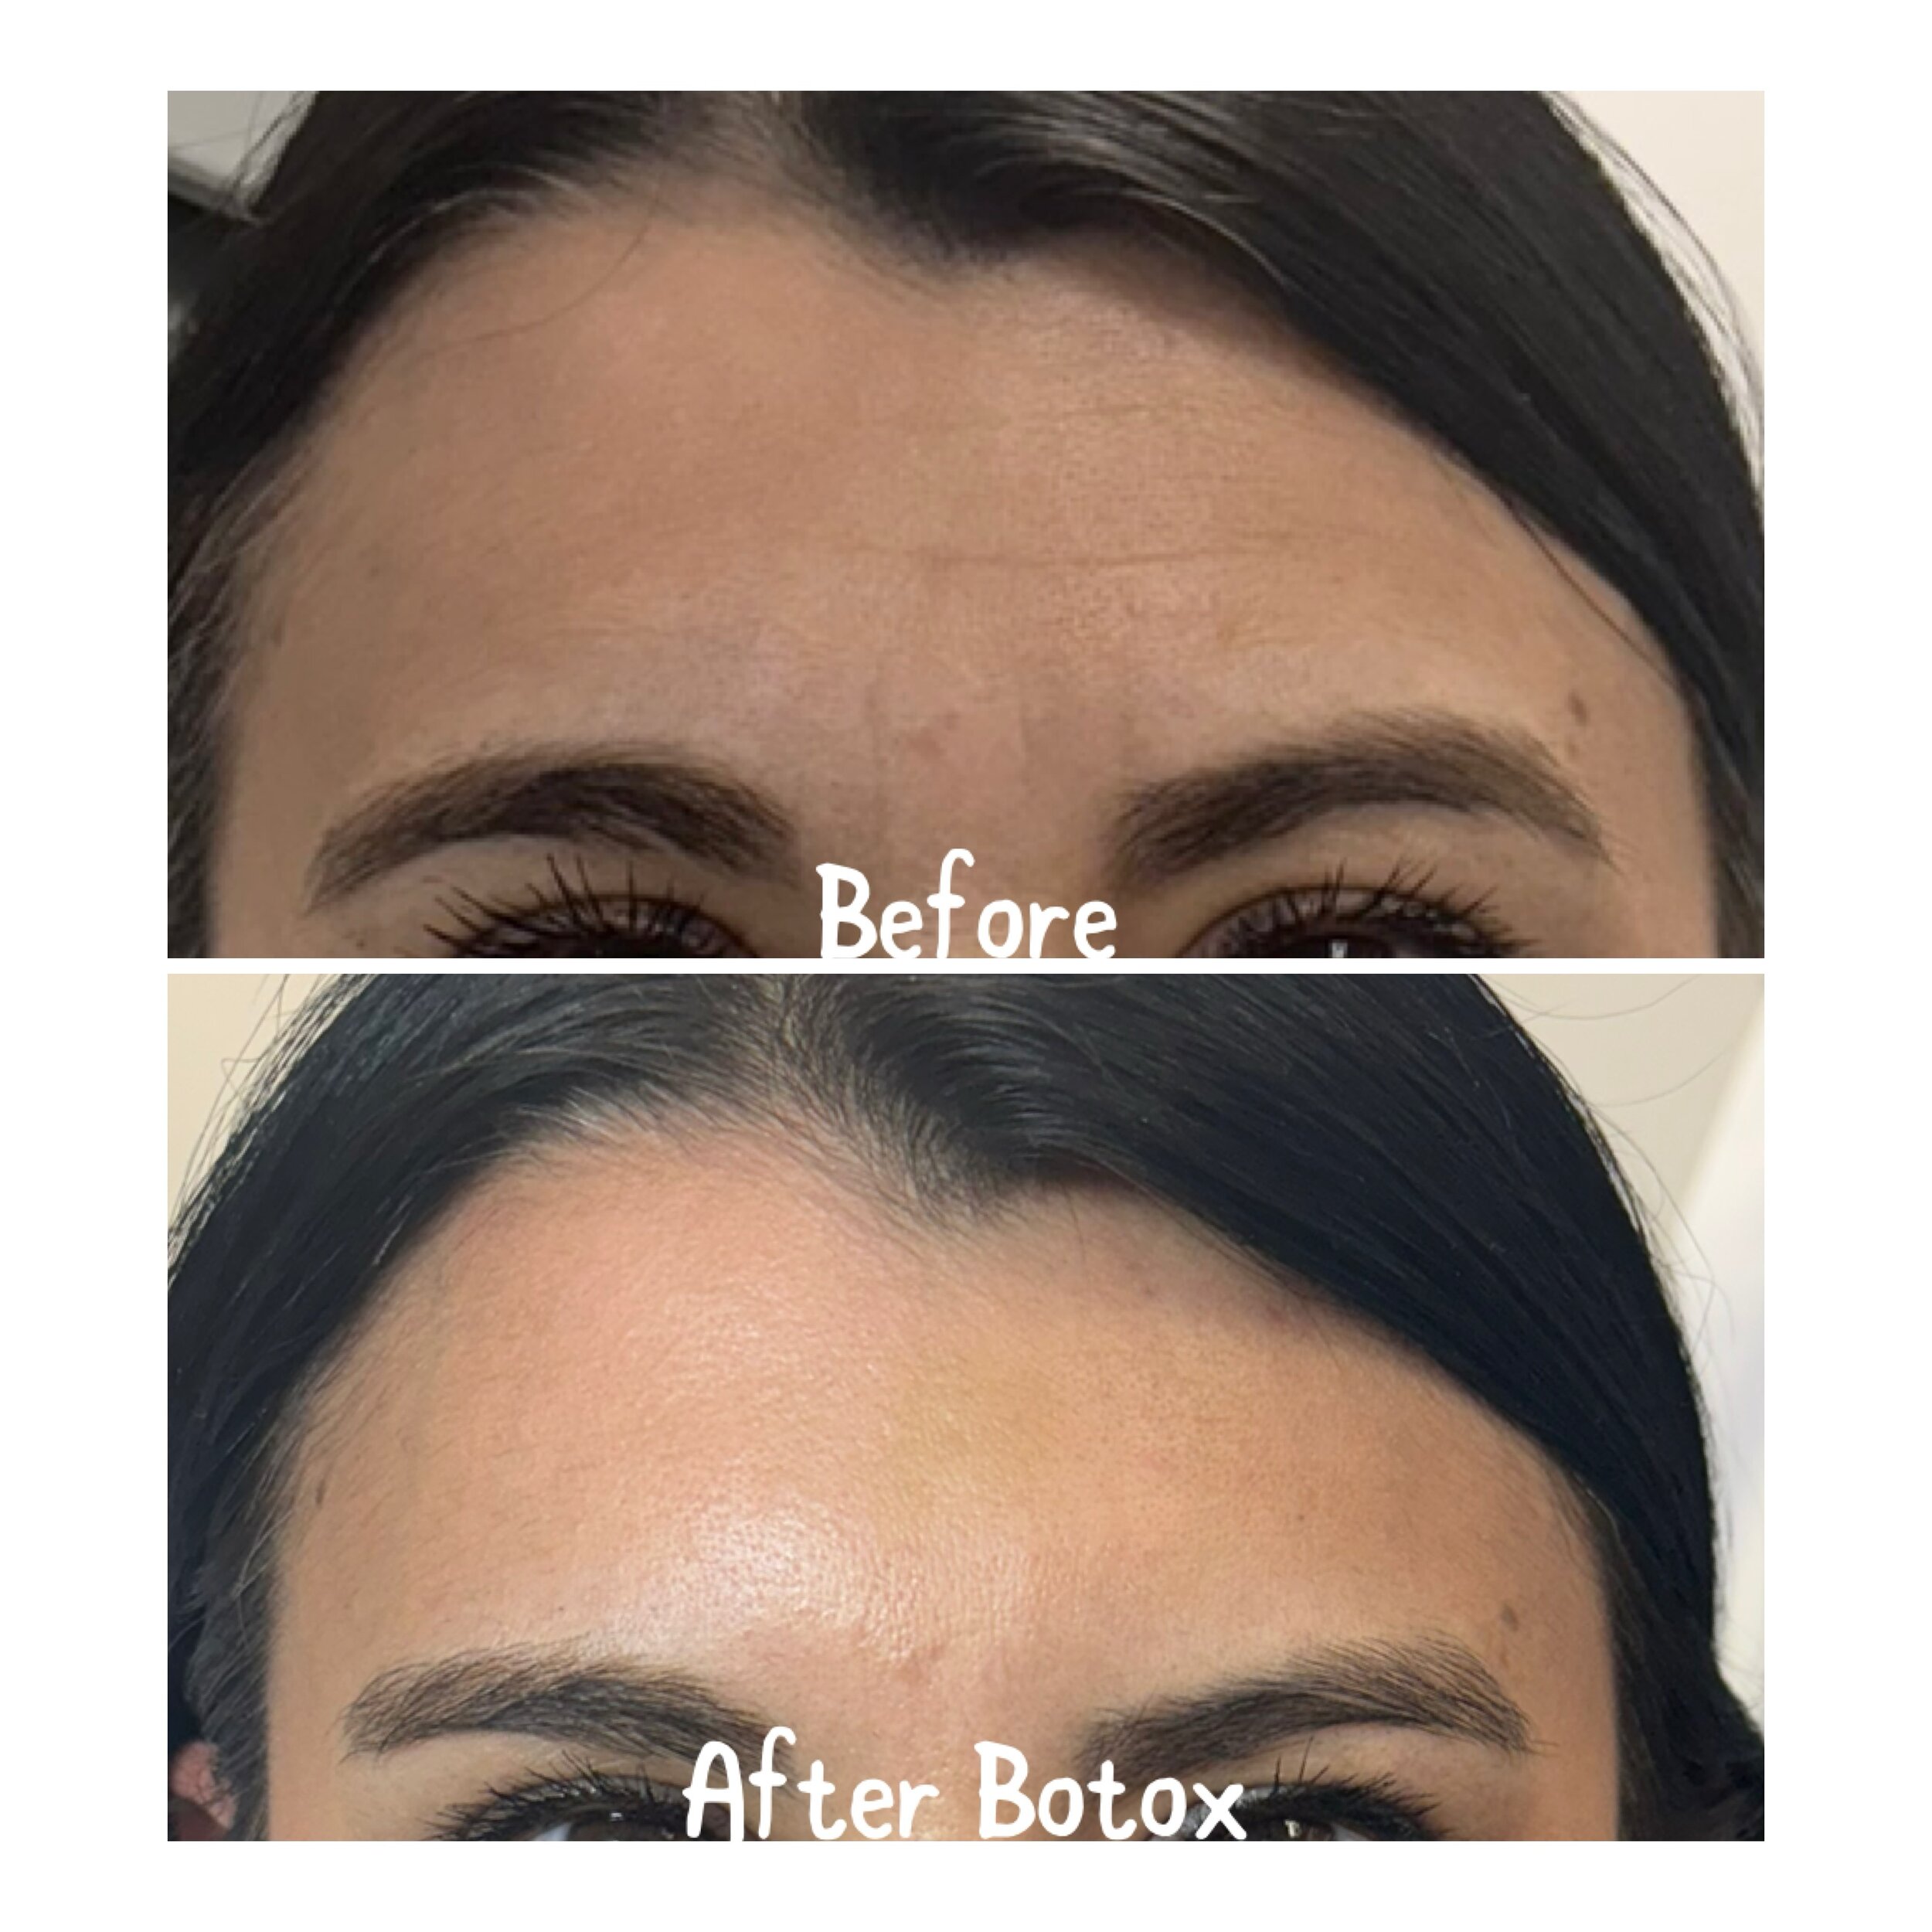 Smooth out the wrinkles and embrace a flawless glow with Botox ✨ Say hello to a refreshed, rejuvenated you! 💉 #BotoxBeauty #YouthfulGlow